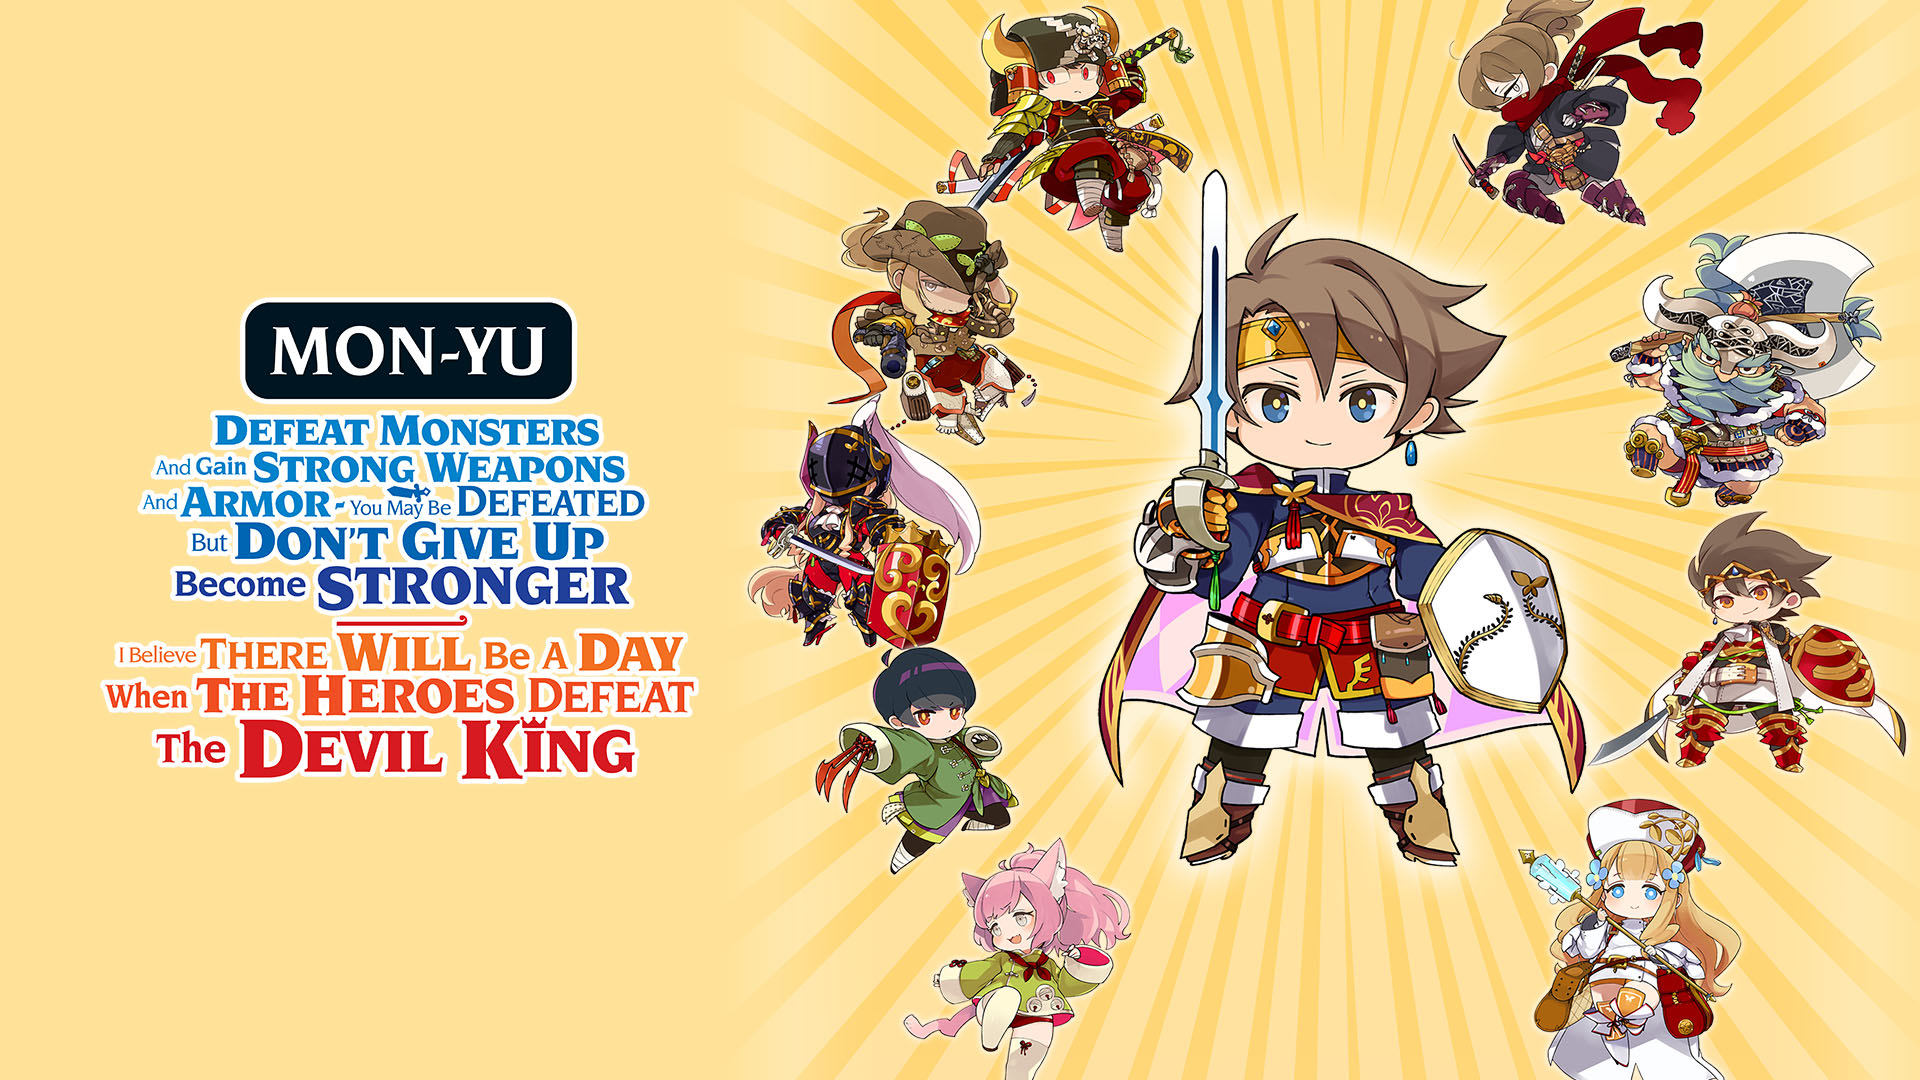 Mon-Yu: Defeat Monsters And Gain Strong Weapons And Armor. You May Be Defeated, But Don’t Give Up. Become Stronger. I Believe There Will Be A Day When The Heroes Defeat The Devil King.